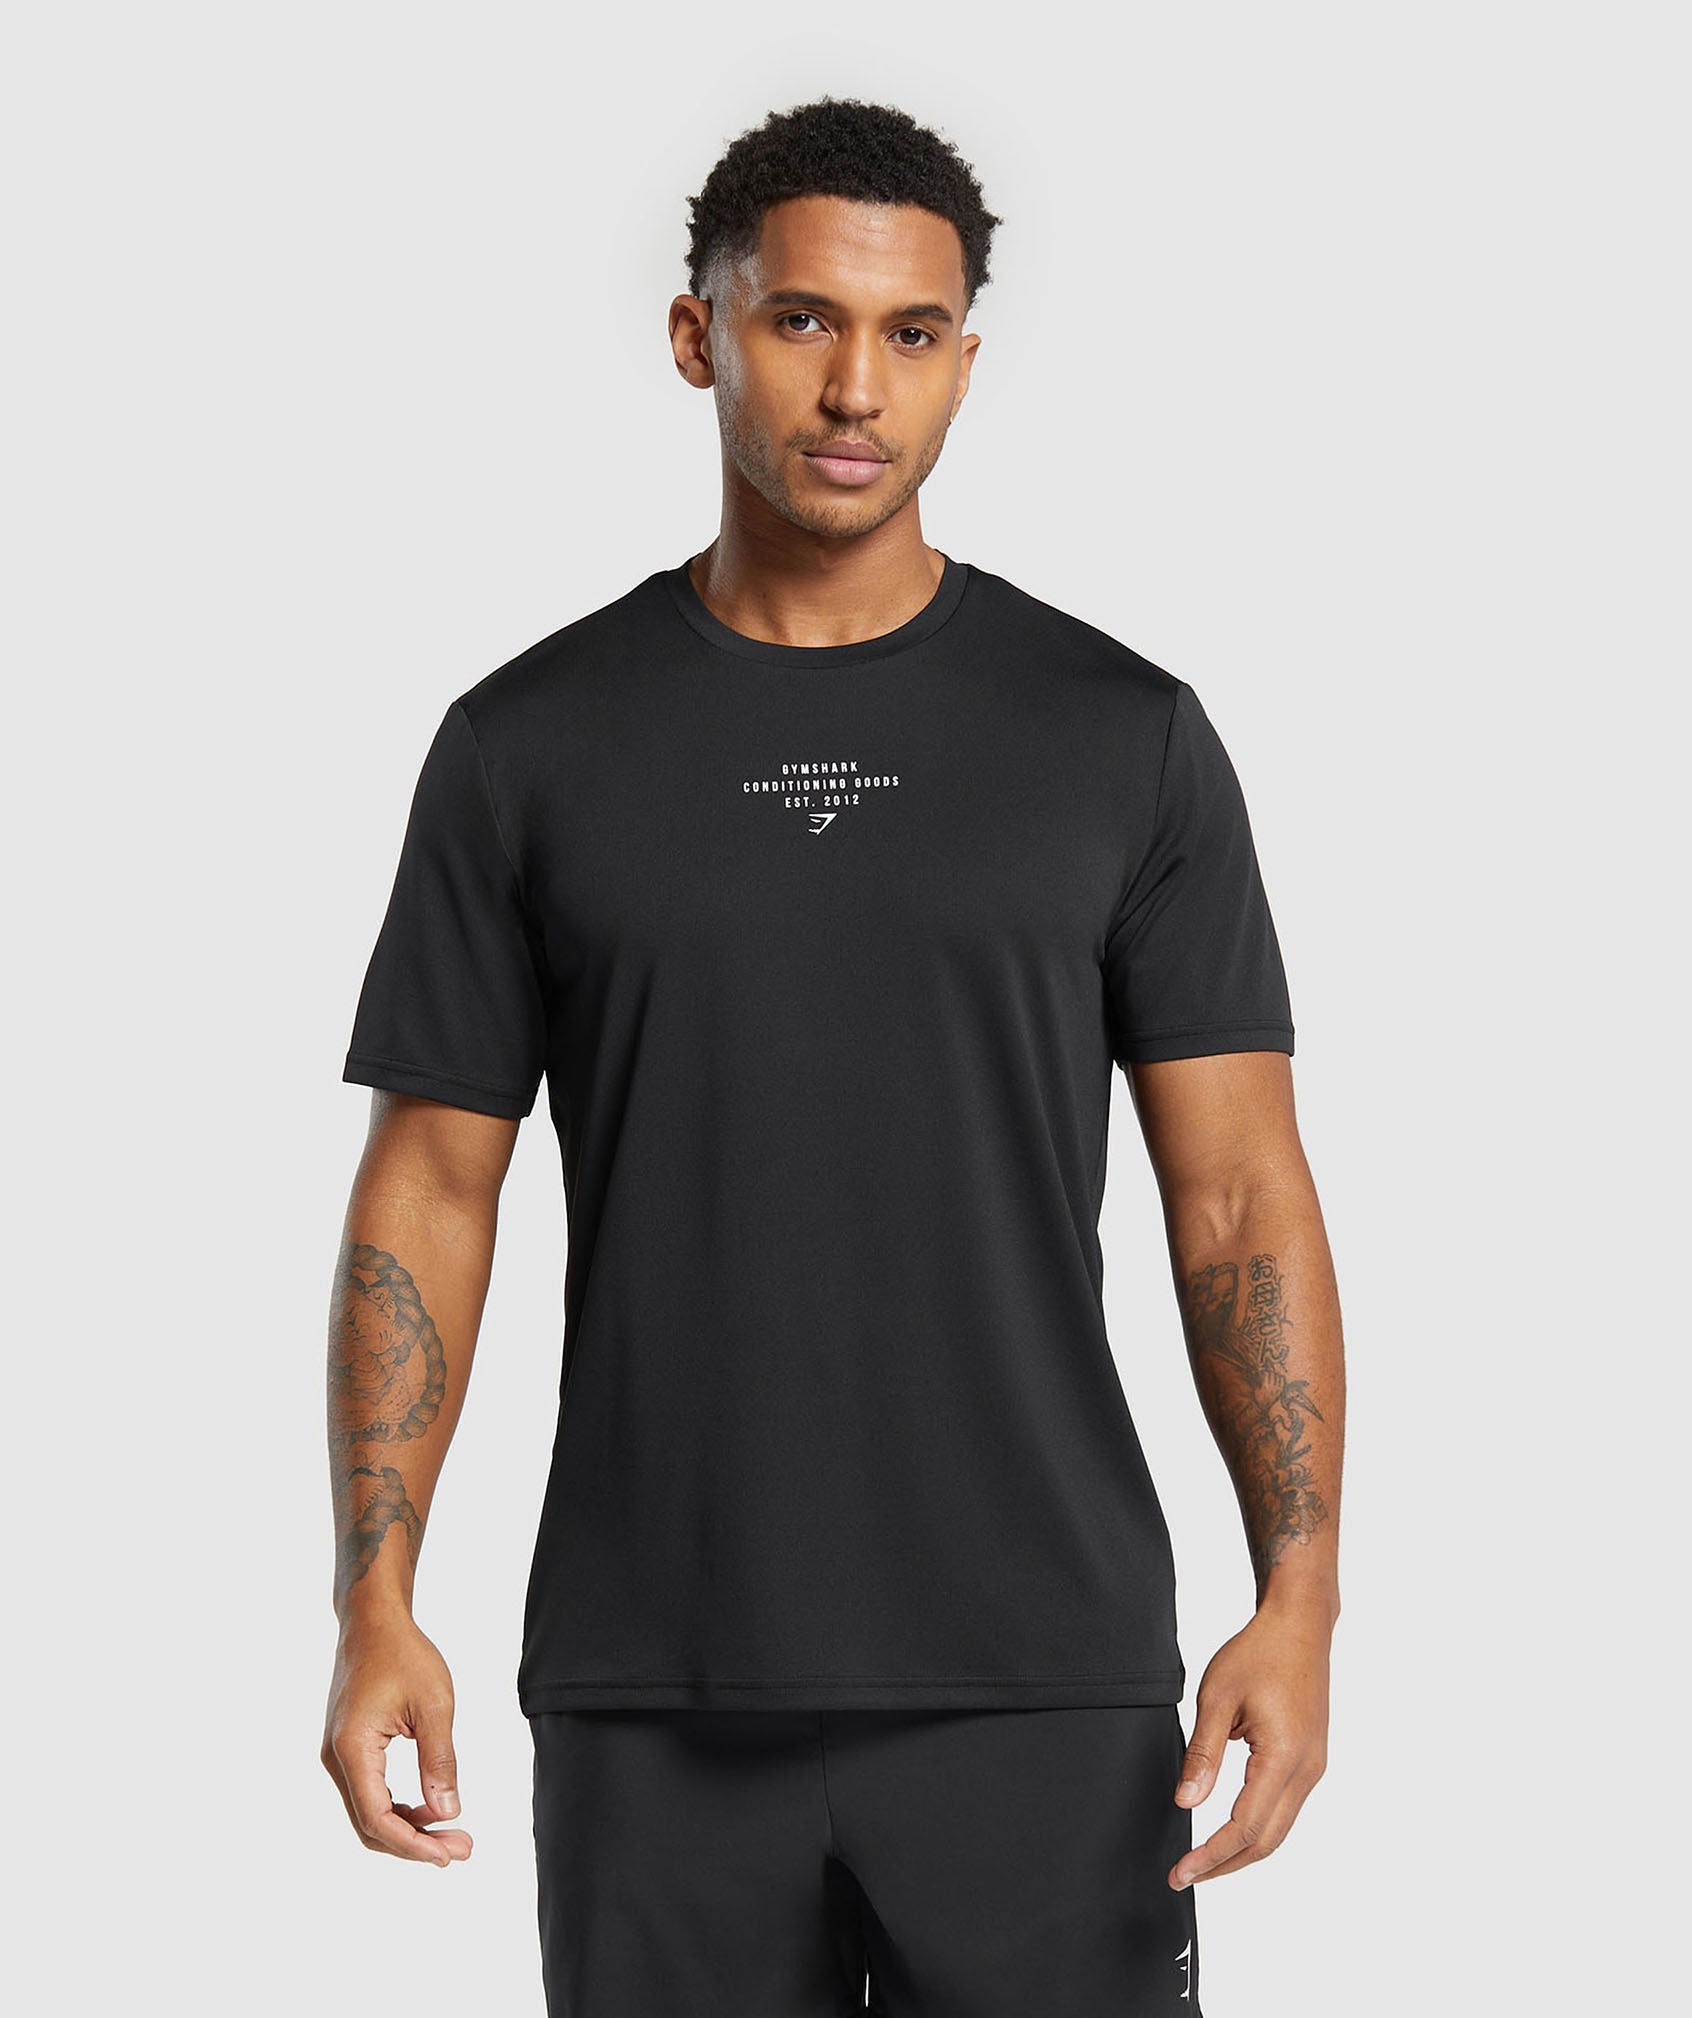 Conditioning Goods T-Shirt in Black